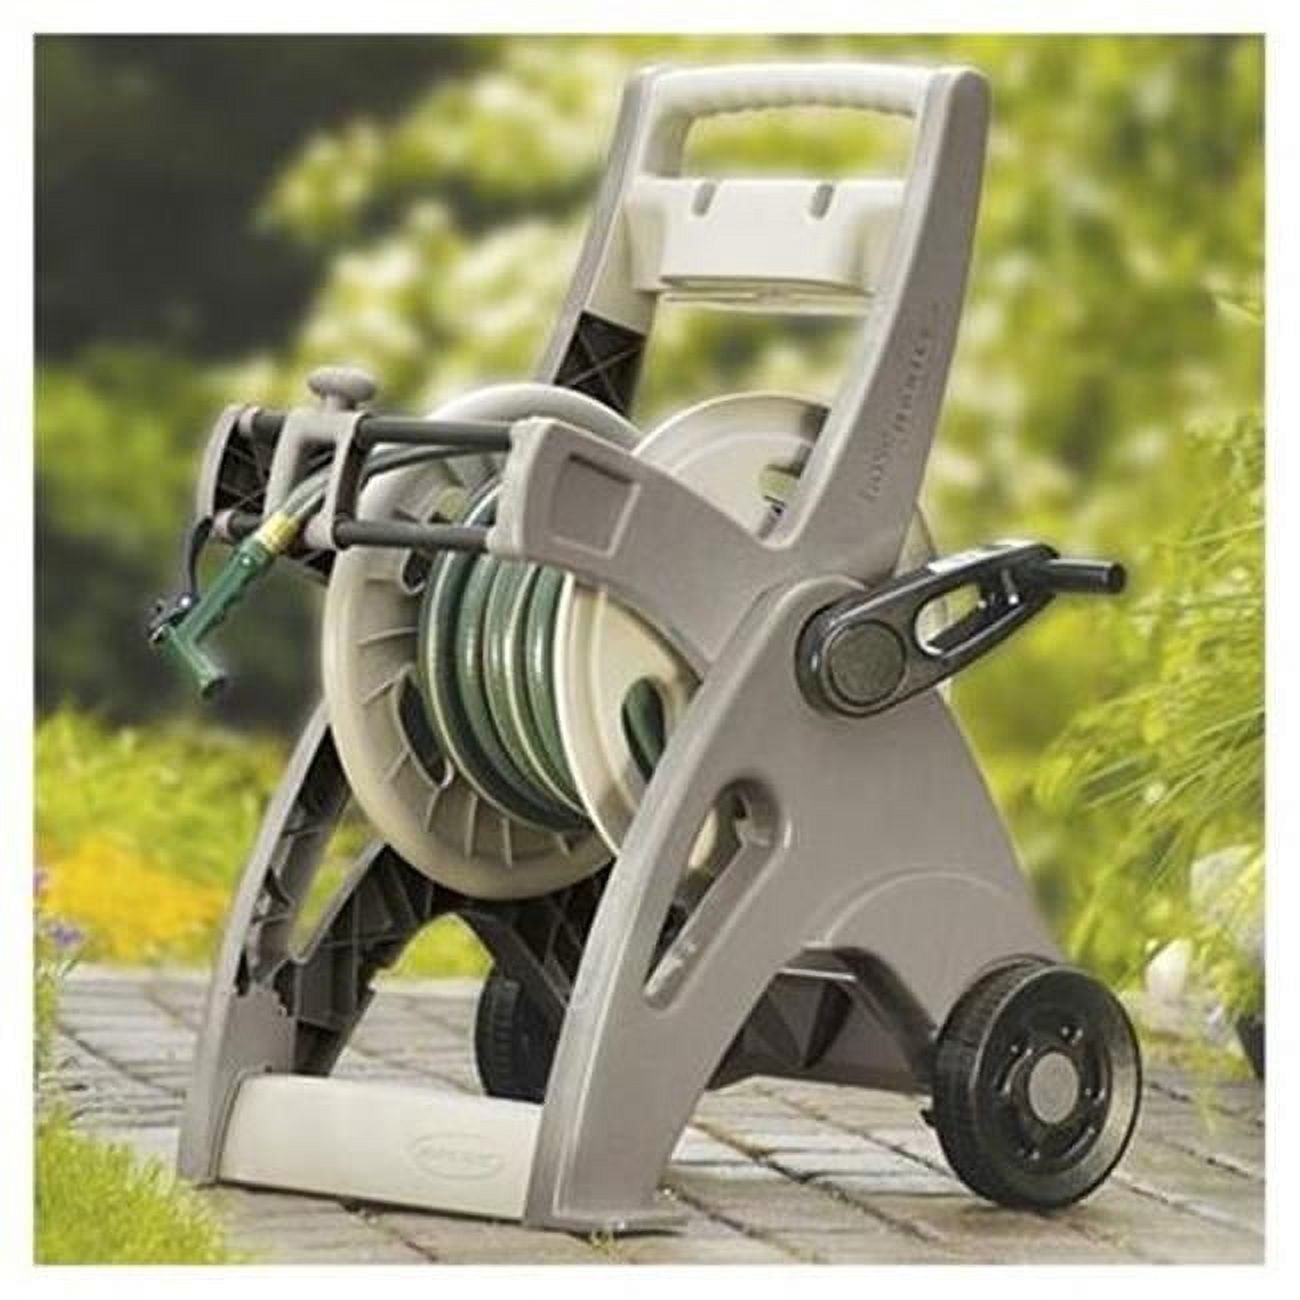 Bentism Hose Reel Cart with Wheels, Metal Hose Reel Holds 175 Feet of 5/8 Hose Capacity Heavy Duty Outdoor Water Planting Truck for Yard, Garden